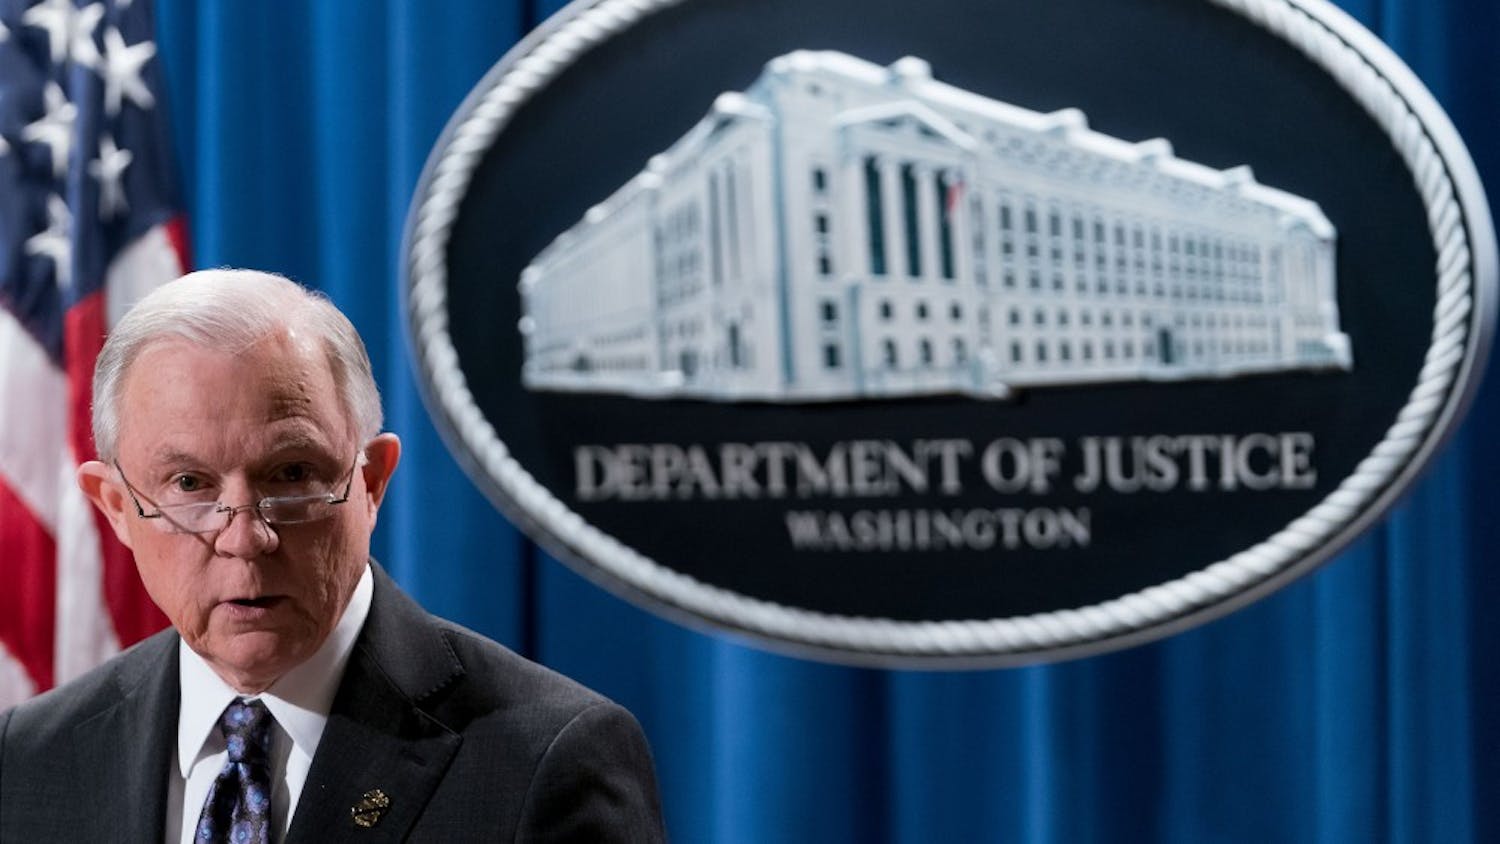 Attorney General Jeff Sessions speaks during a press conference announcing new tools to combat the opioid crisis at the Department of Justice in Washington D.C., United States of America on Nov 29, 2017. (Ting Shen/Xinhua/Sipa USA/TNS)